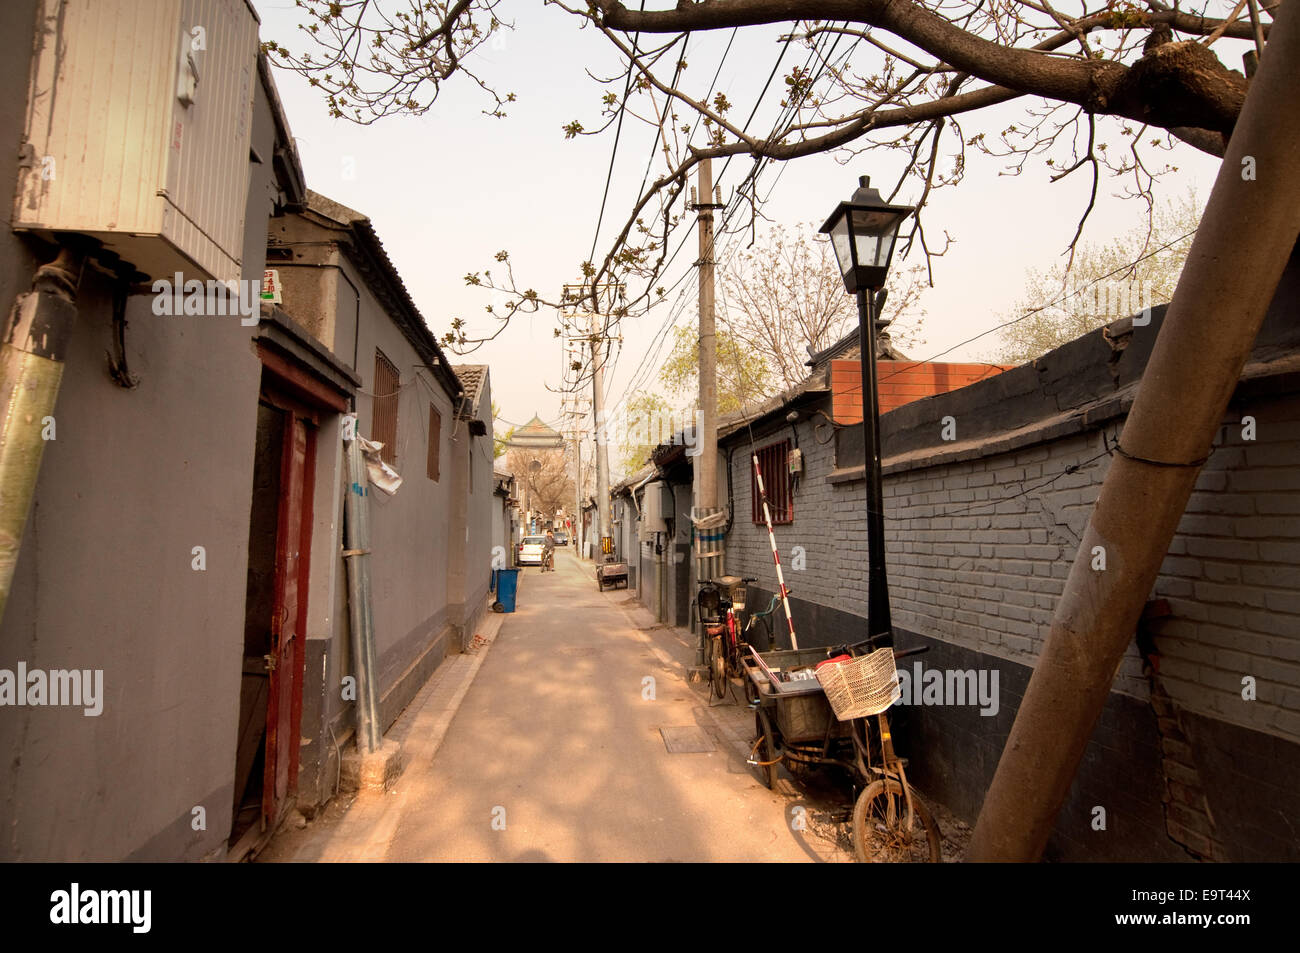 Rue hutong, Beijing, Chine Banque D'Images